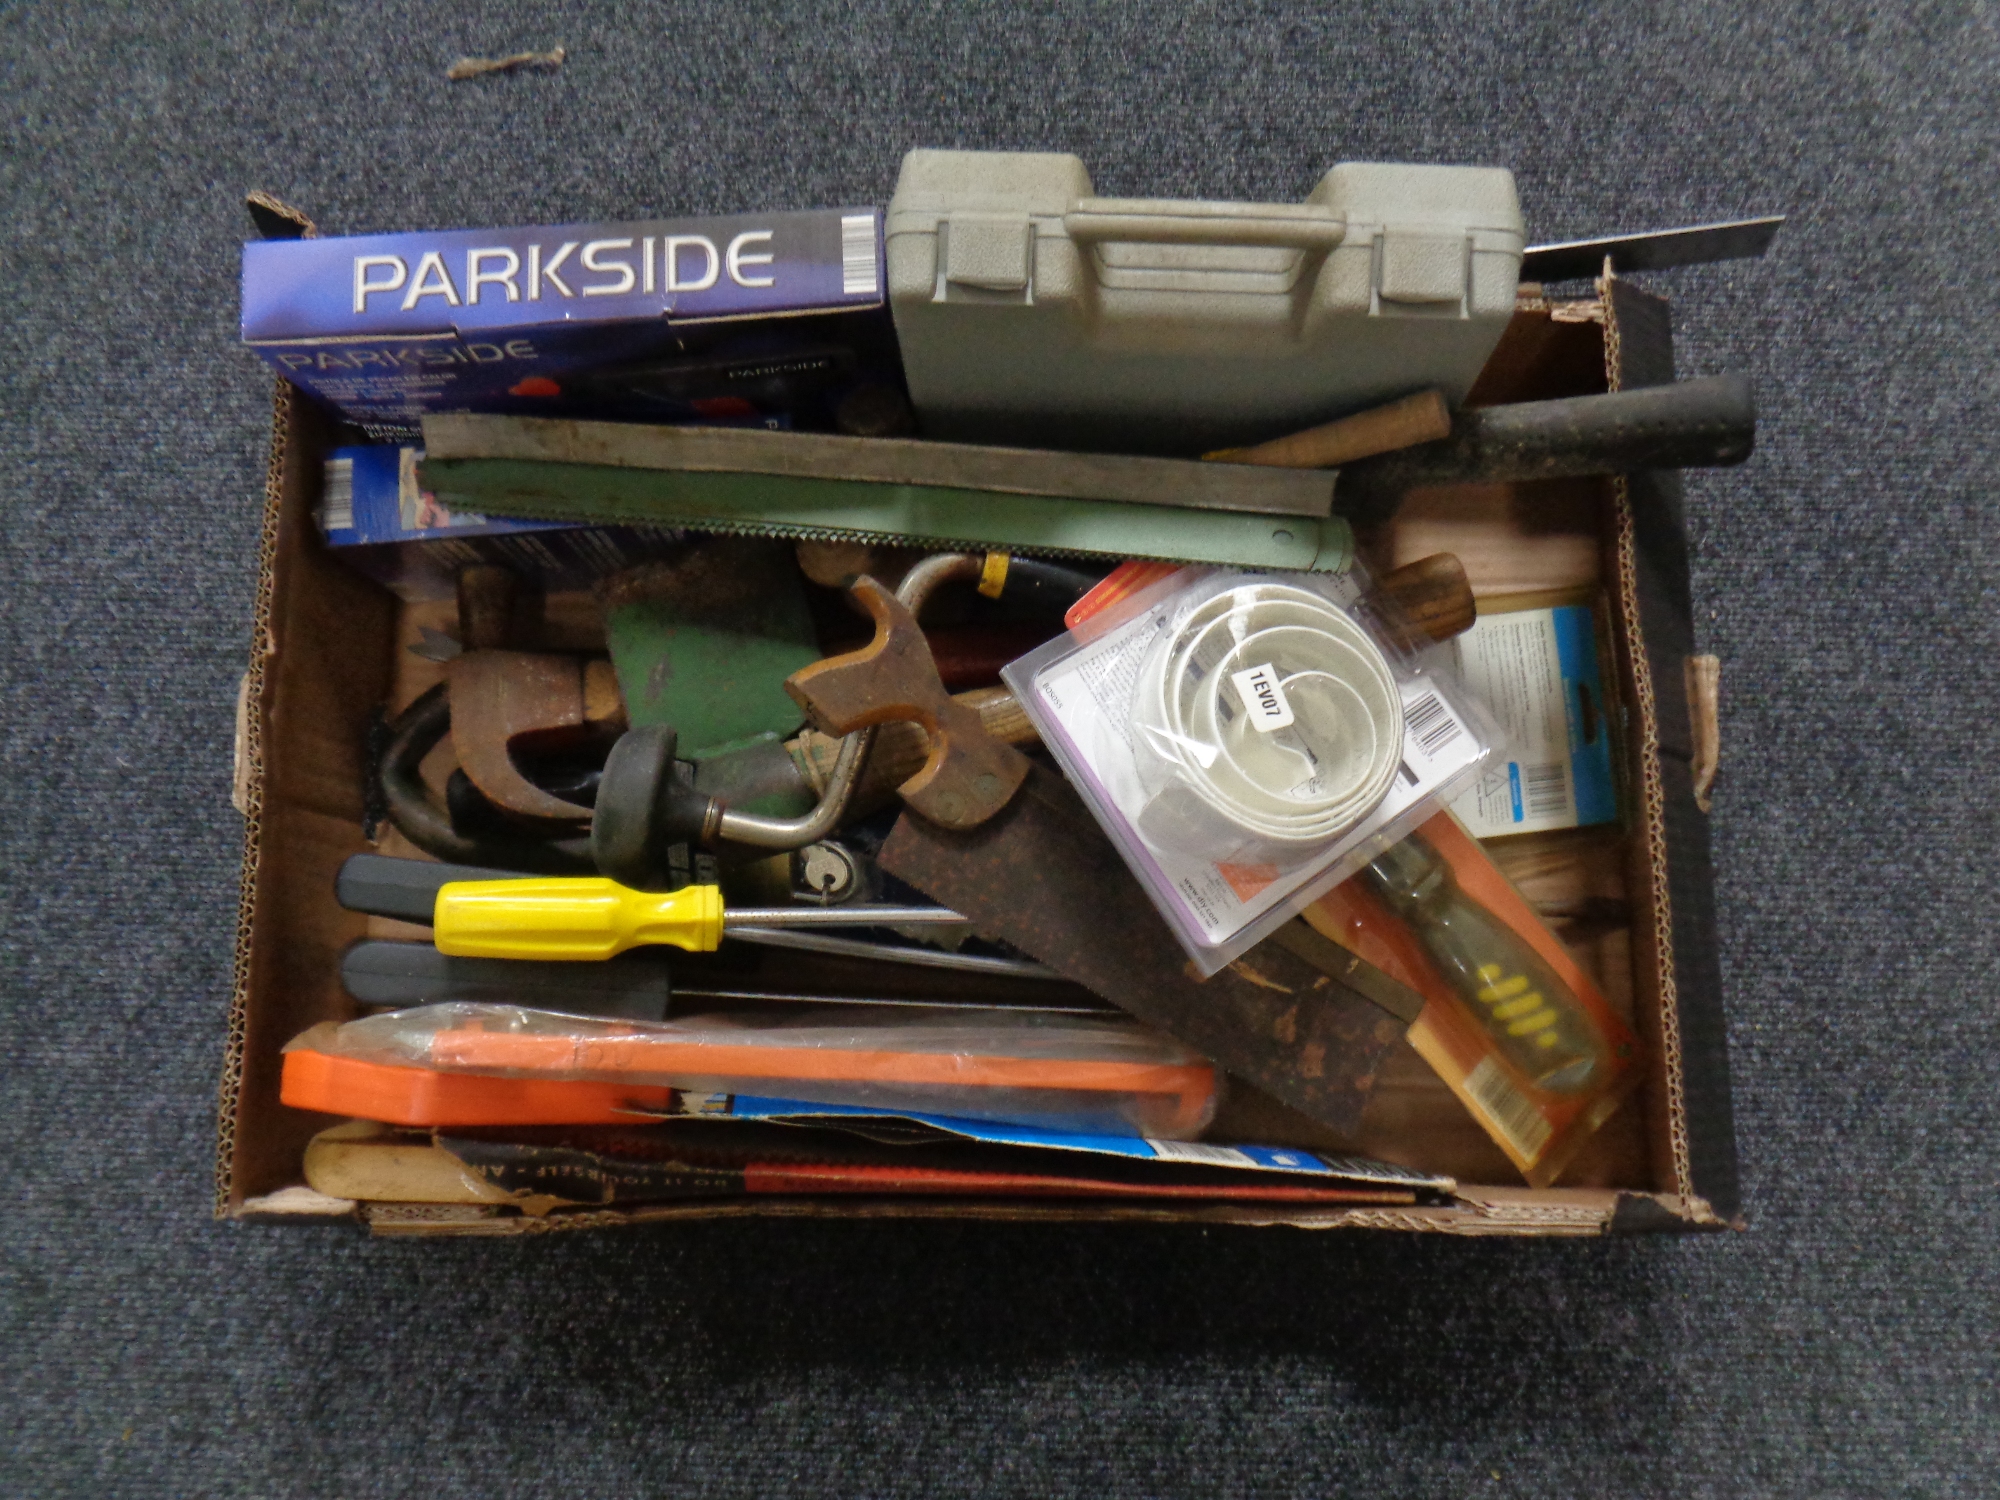 A box of assorted vintage and later hand tools, Parkside glue gun etc.